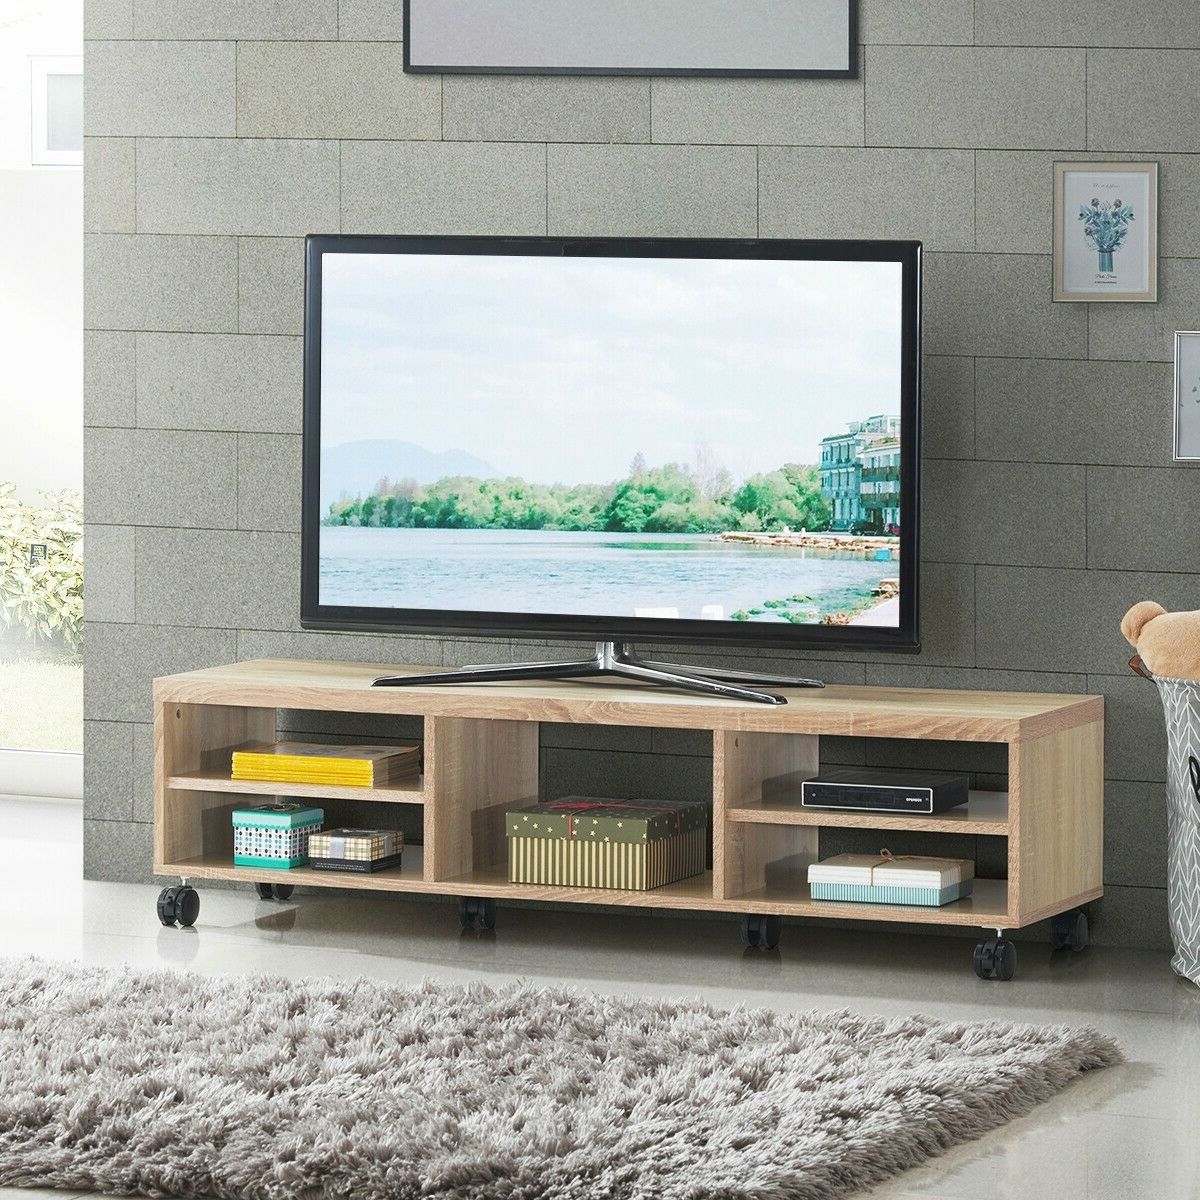 Rolling 60 Inch Tv Stand In Natural Wood Finish With 6 Wheel Regarding Modern Rolling Tv Stands (View 18 of 20)